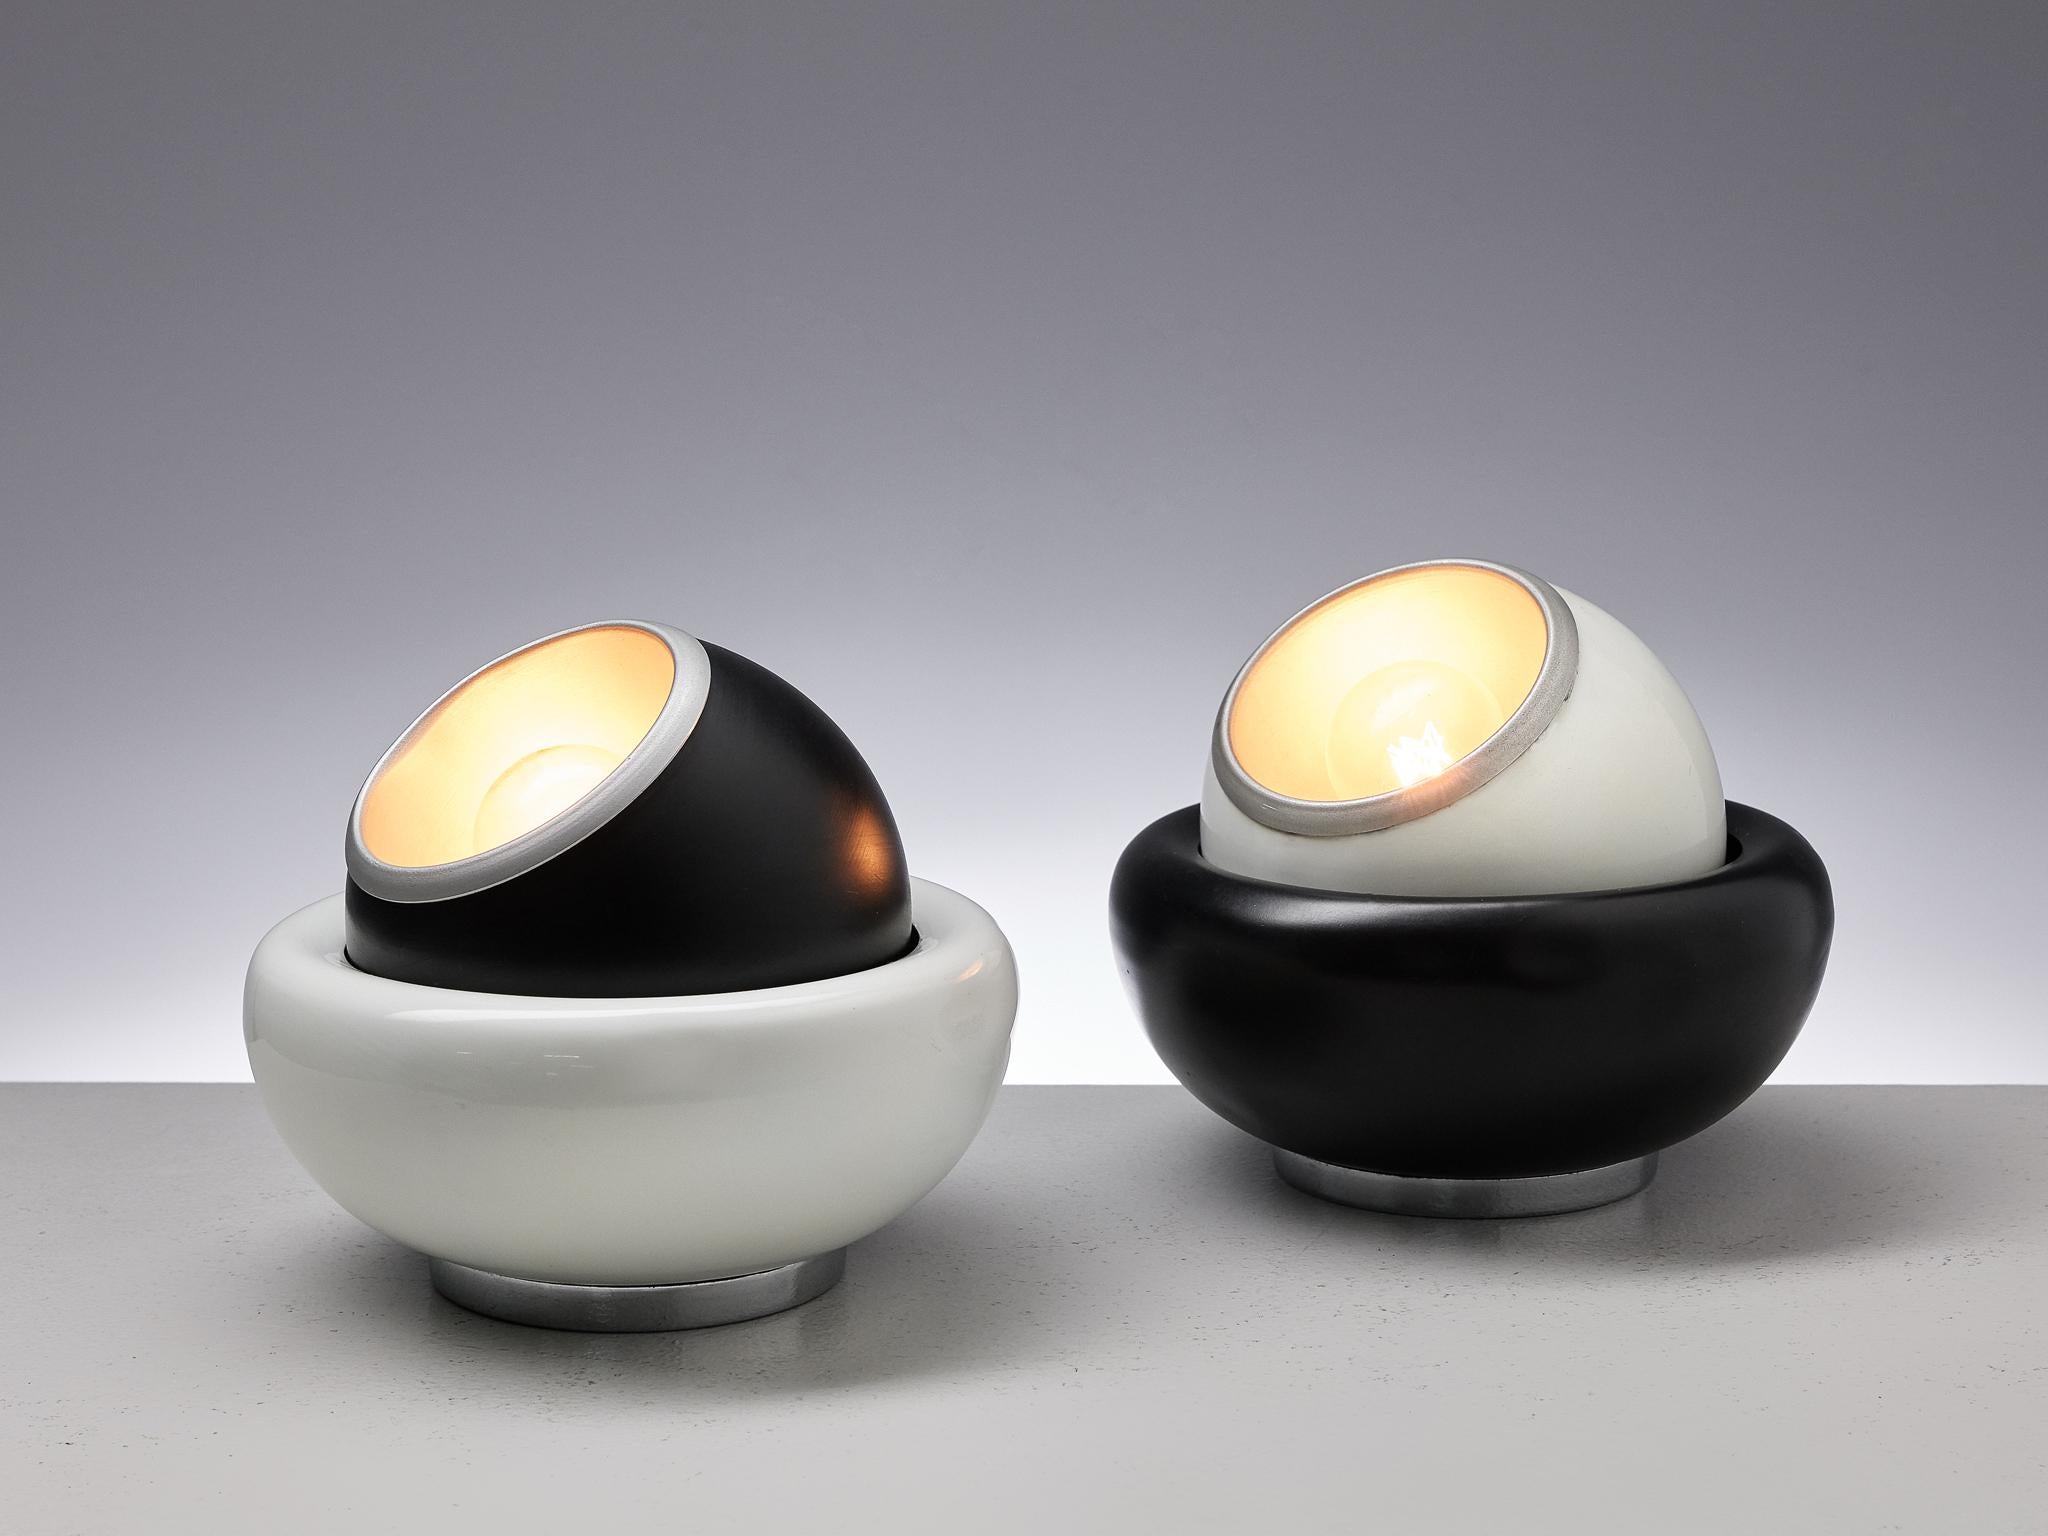 Pair of table lamps, black and white lacquered metal, Italy, 1970s

A pair of postmodern table lamps in black and white lacquered metal. The lights consist of a bowl that holds the sphere, which can be rotated in any direction. With their round